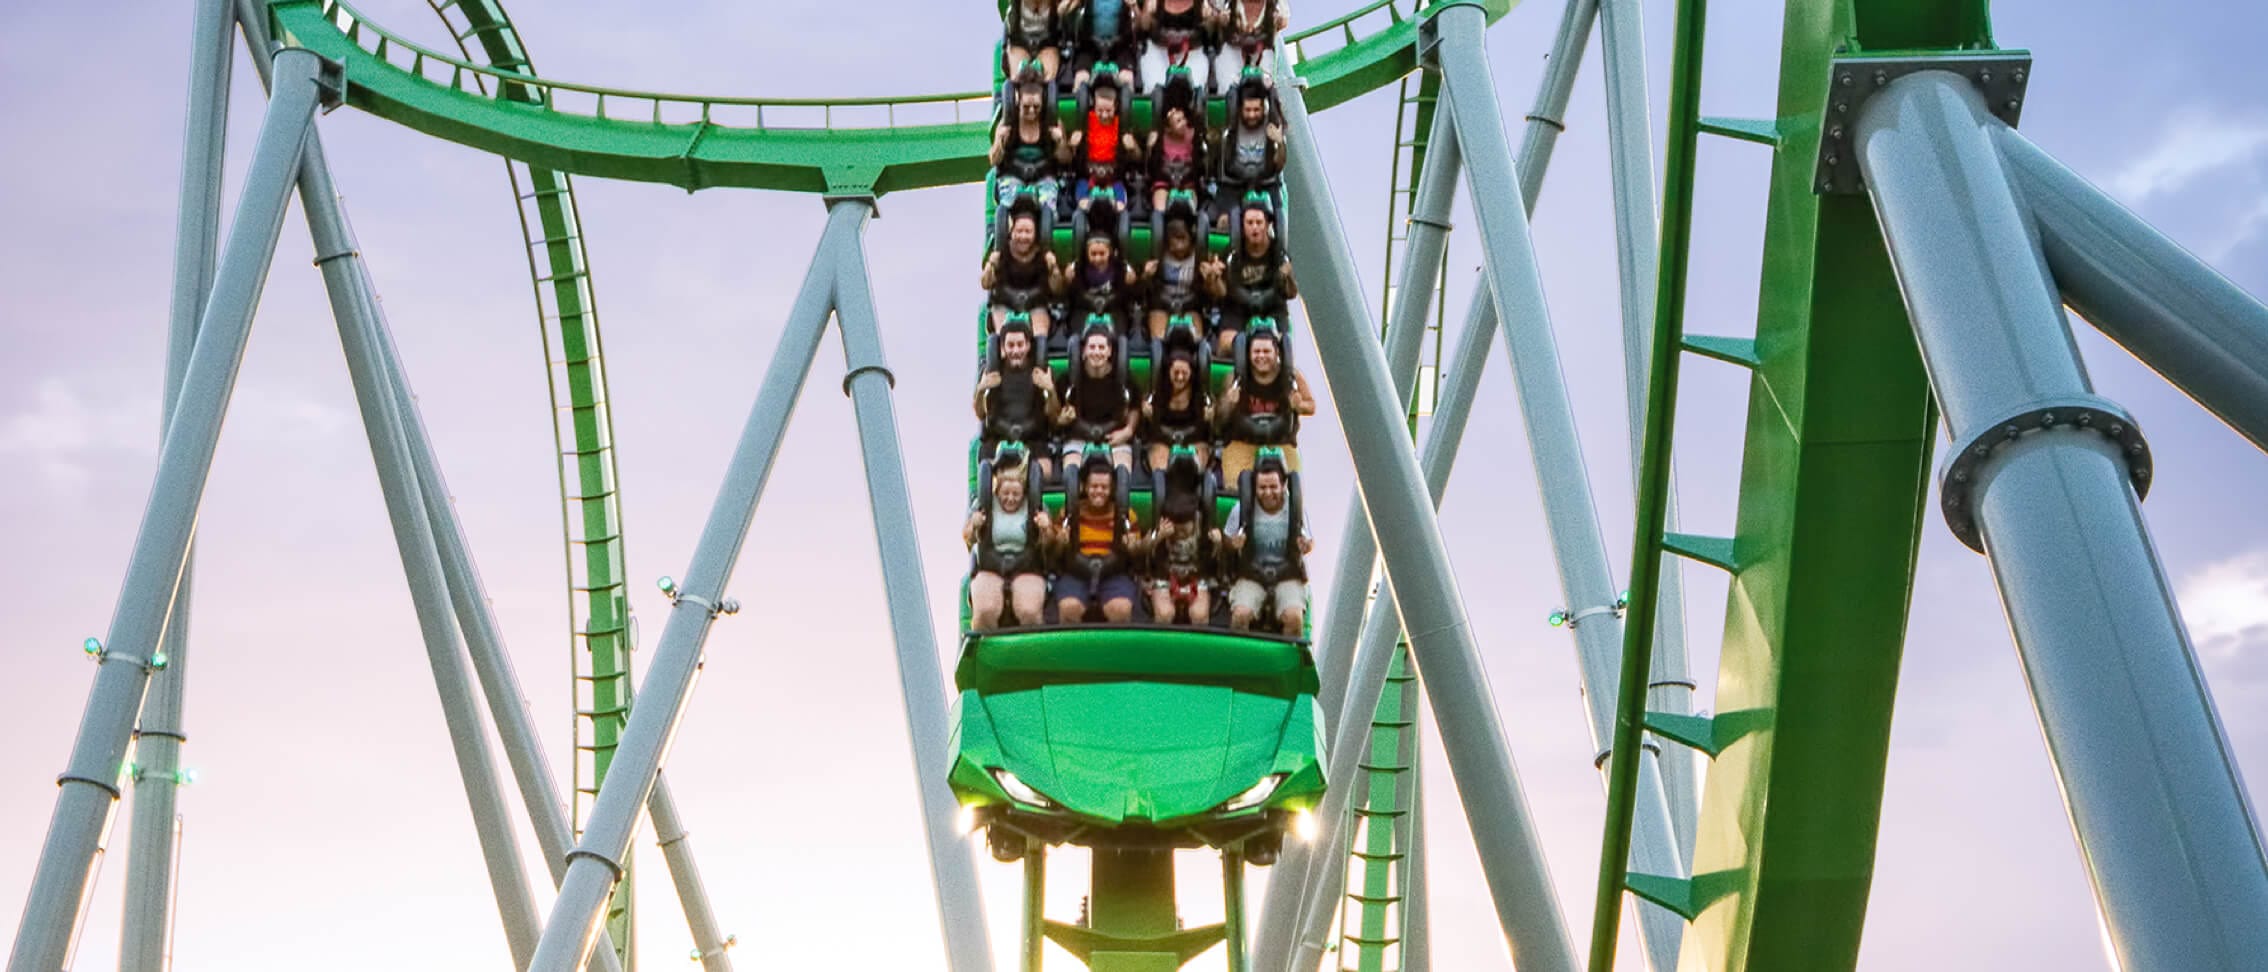 The Incredible Hulk at Islands of Adventure theme park in Orlando, Florida.  best rollercoaster for families and adventure seekers